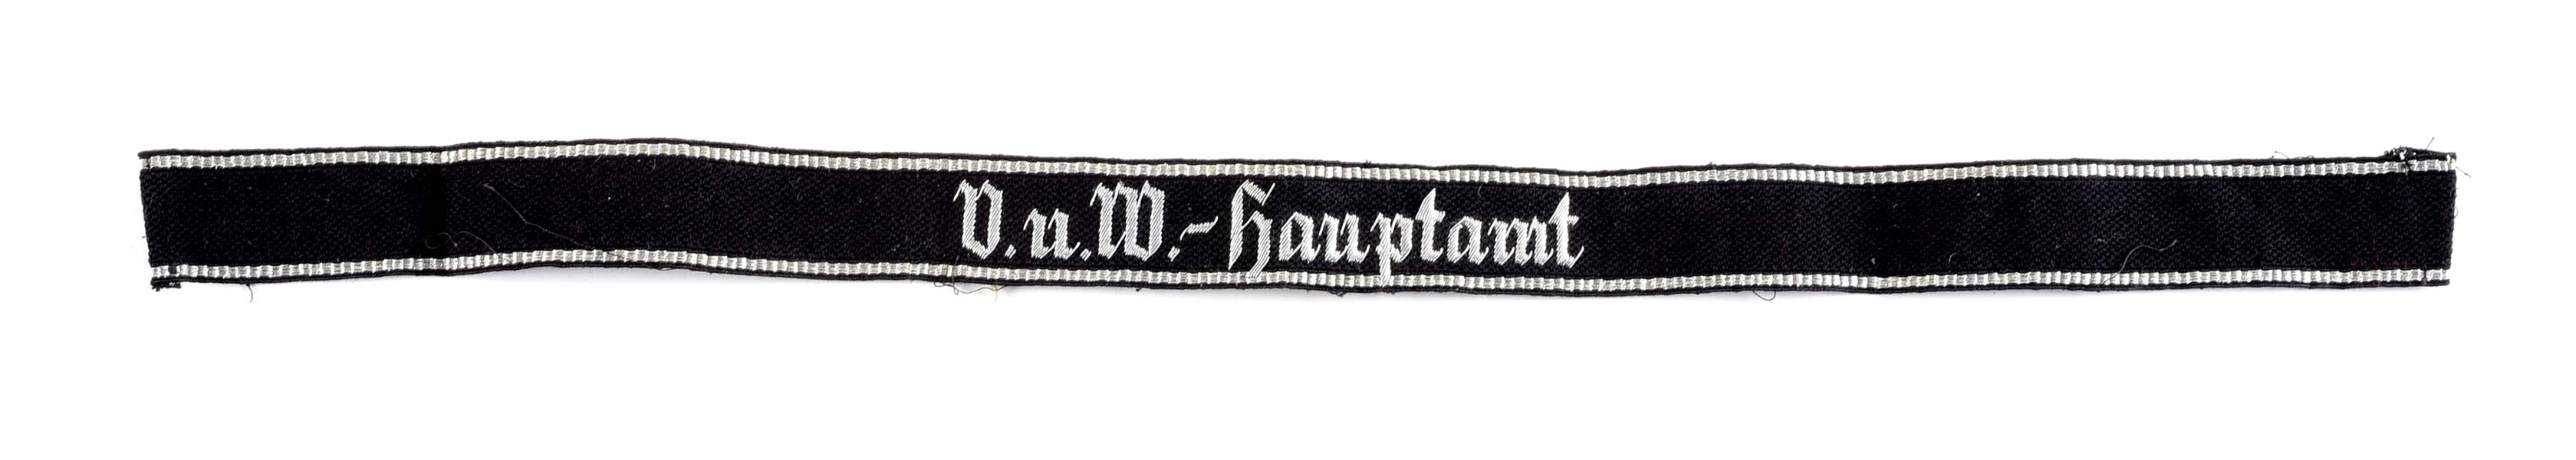 RARE AND DESIRABLE EARLY SS CUFF TITLE "V.U.W - HAUPTAMT" IN HAND EMBROIDERED BULLION.